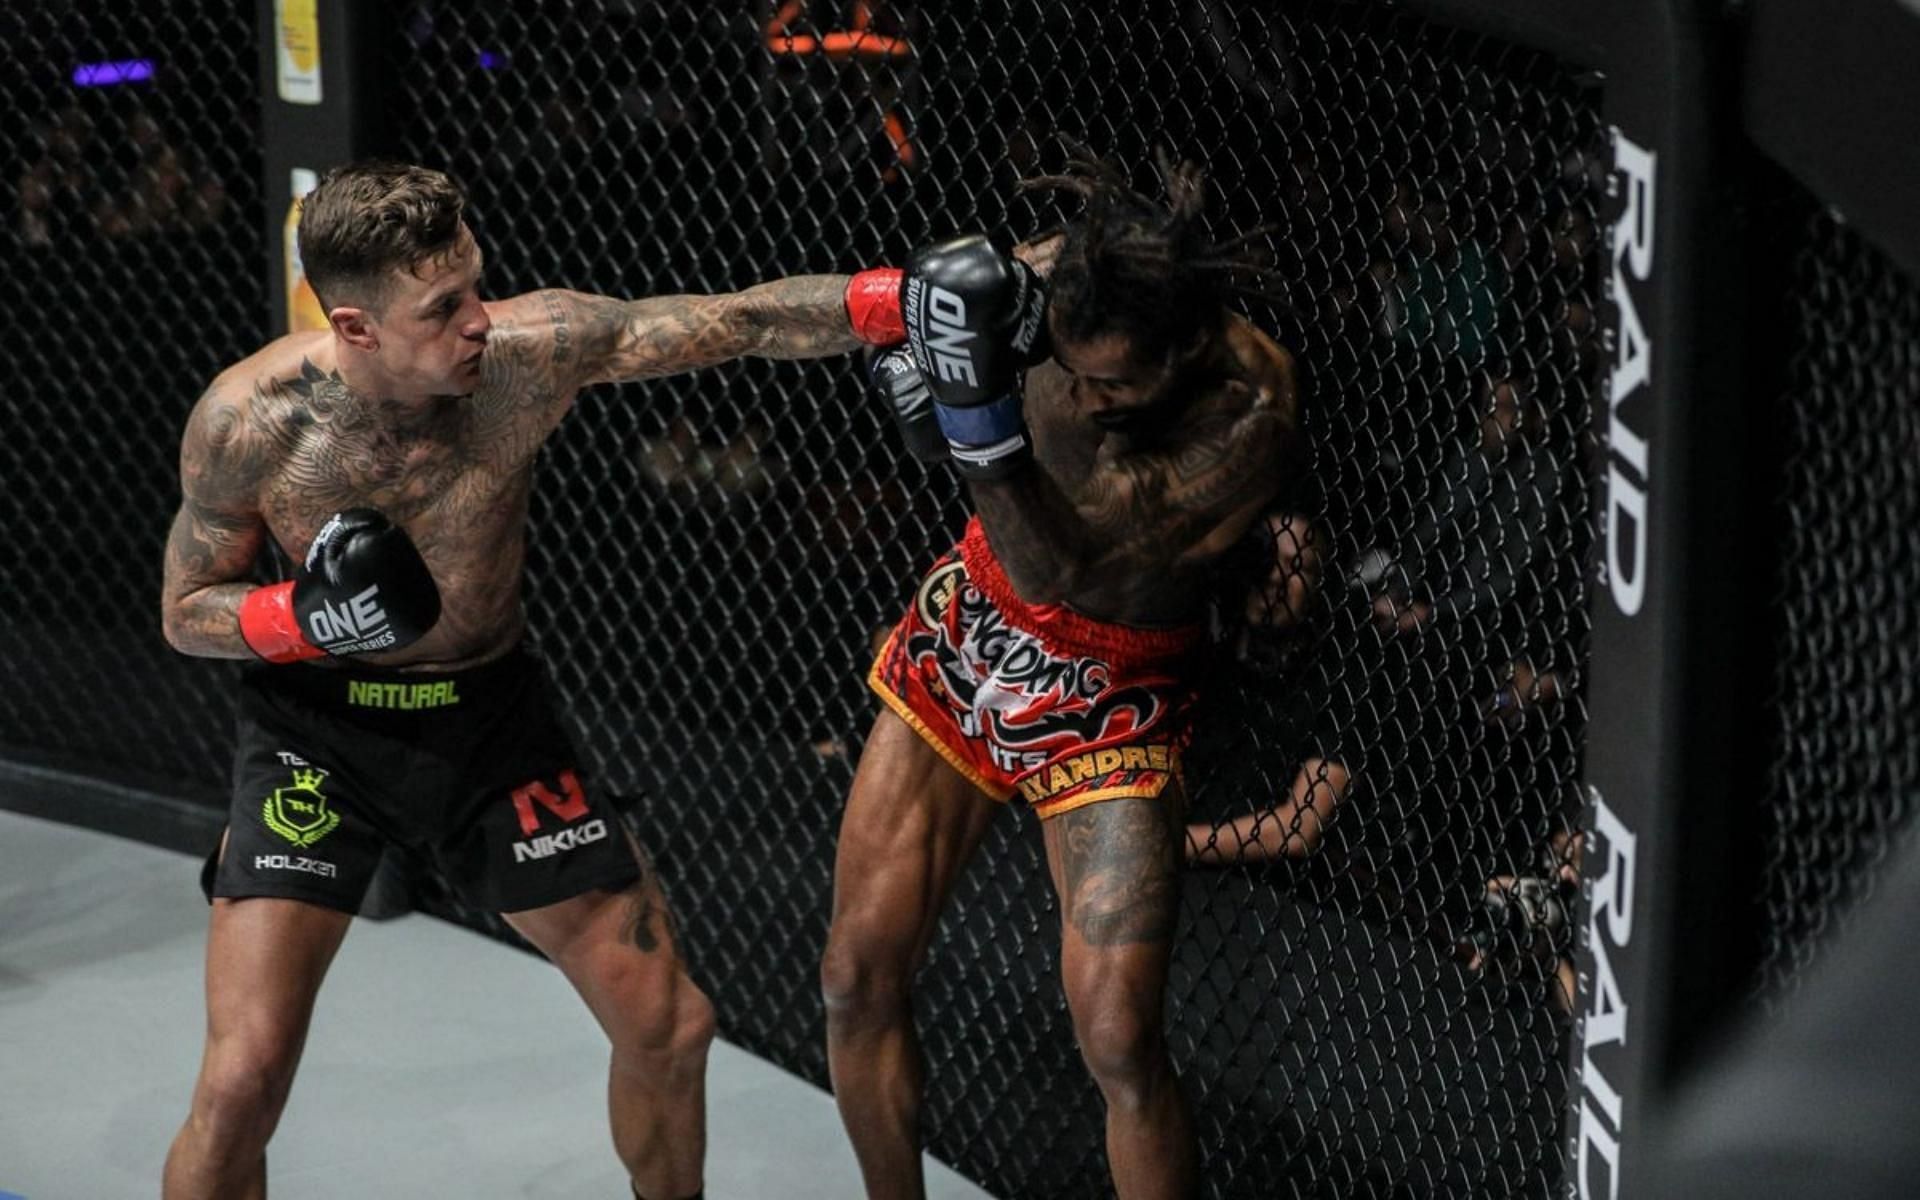 Nieky Holzken (left) will face Sinsamut Klinmee at ONE X on March 26. (Image courtesy of ONE Championship)